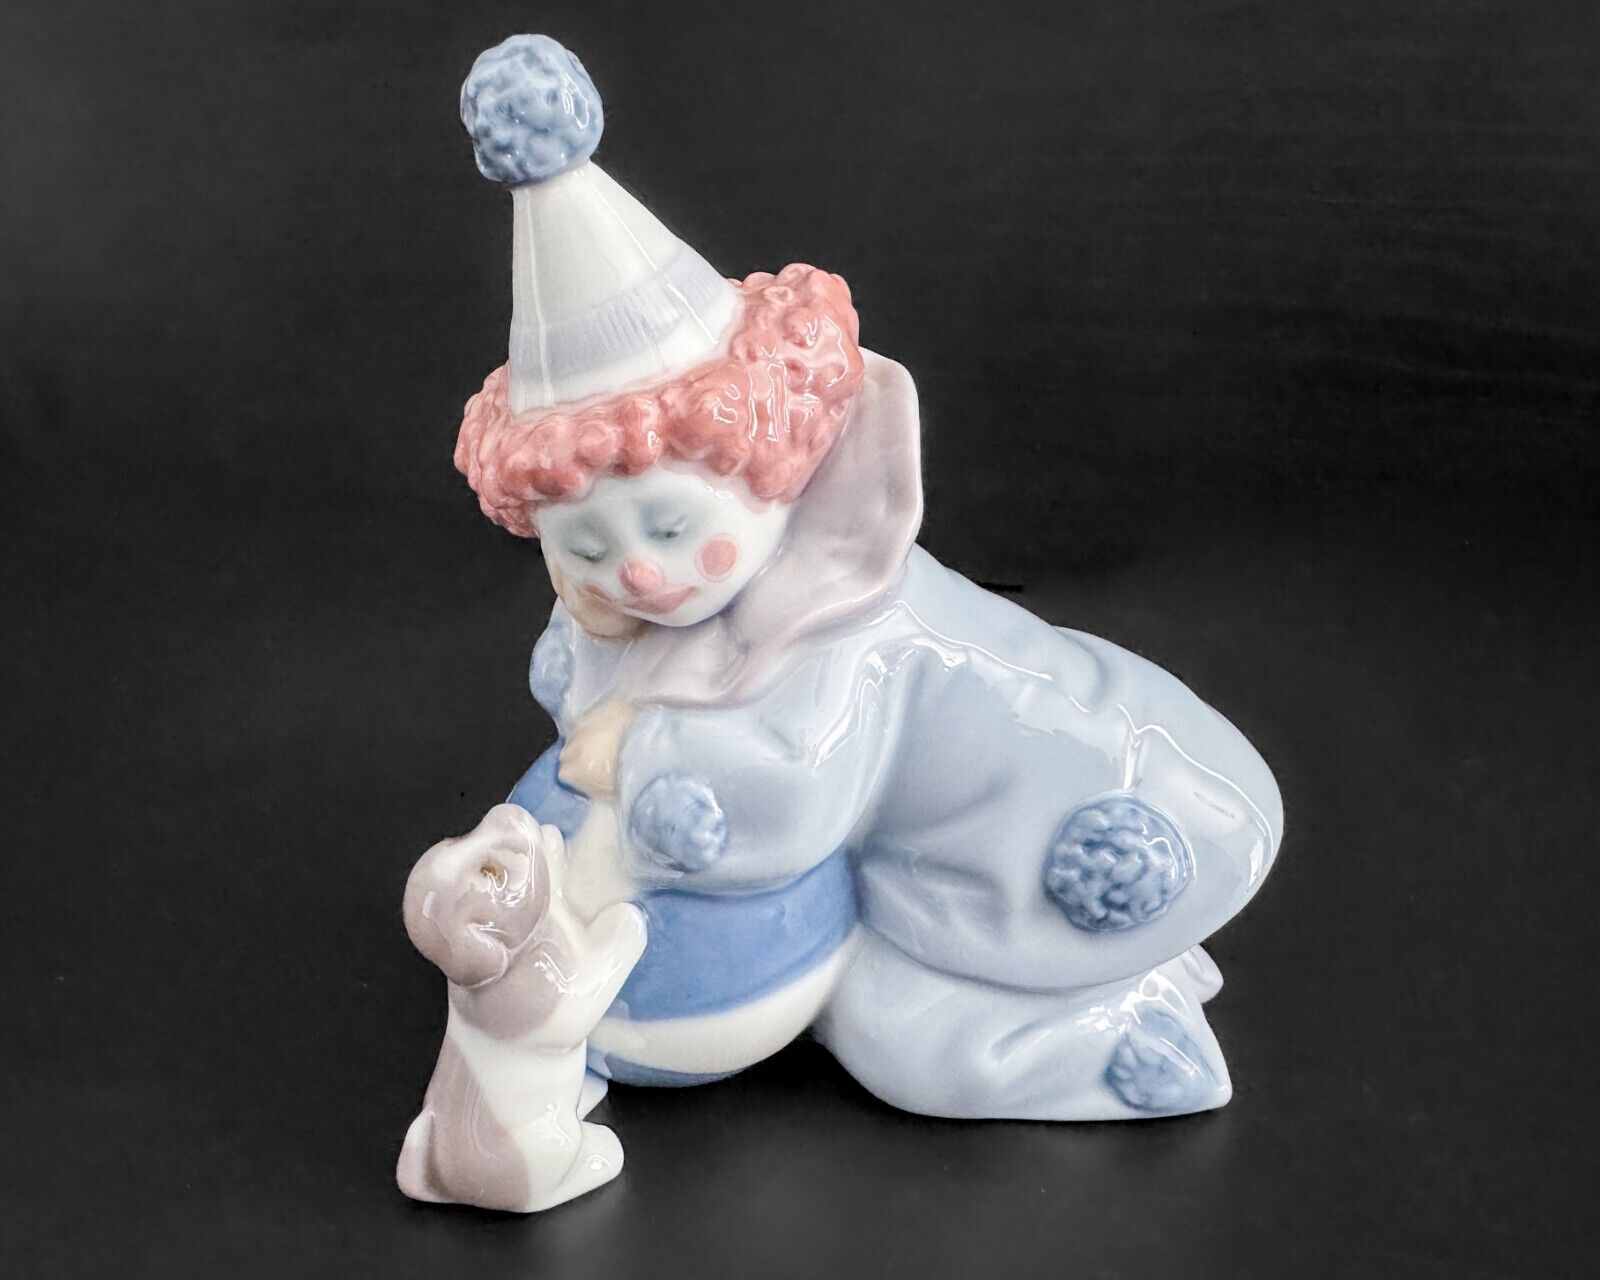 Lladro 5278 Clown Pierrot with Puppy and Ball Figurine